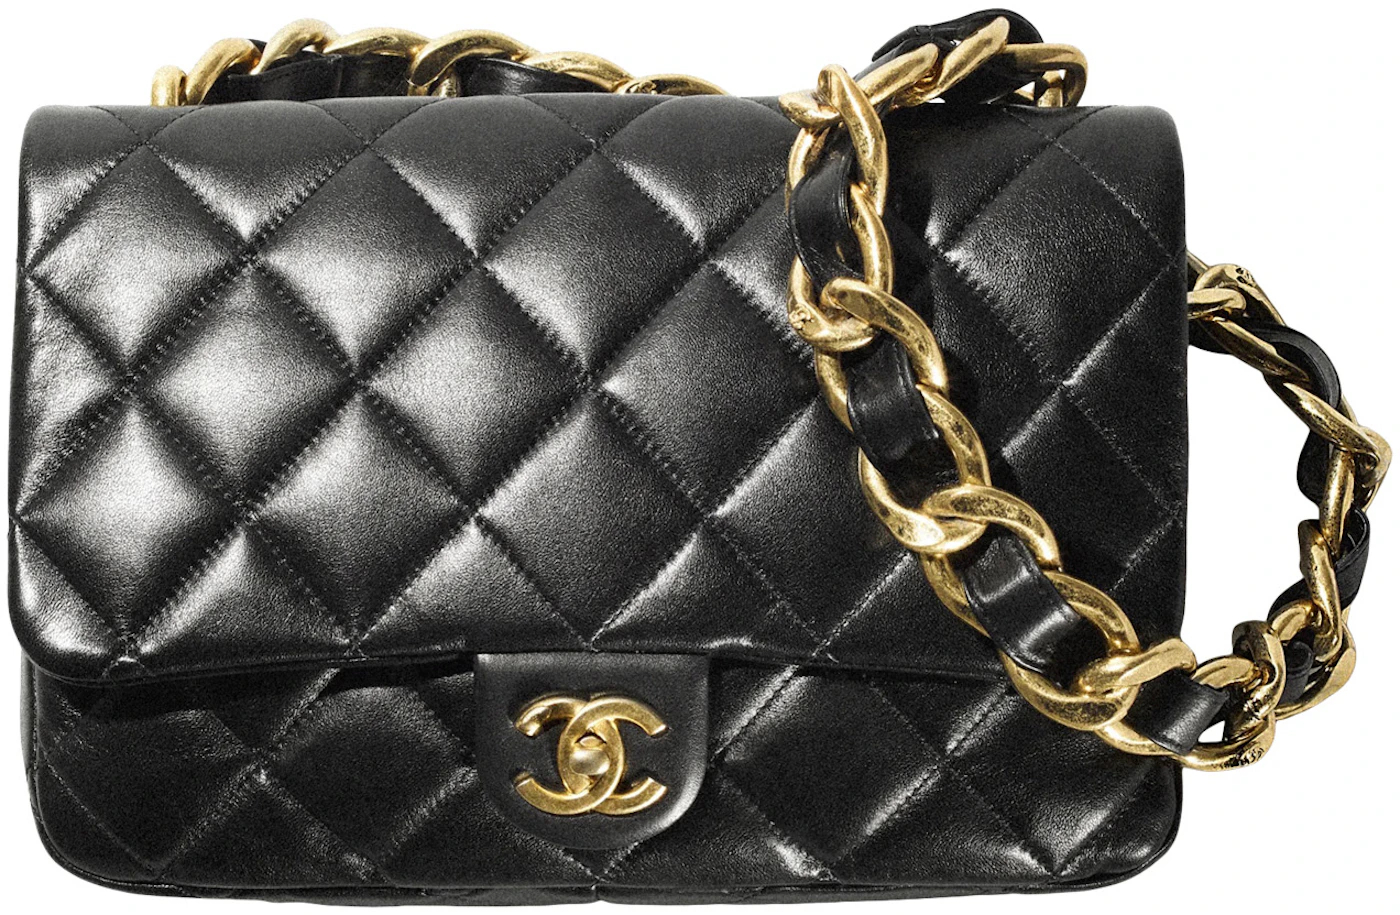 Chunky Flat Gold Chain Bag Strap - For Louis Vuitton, Chanel